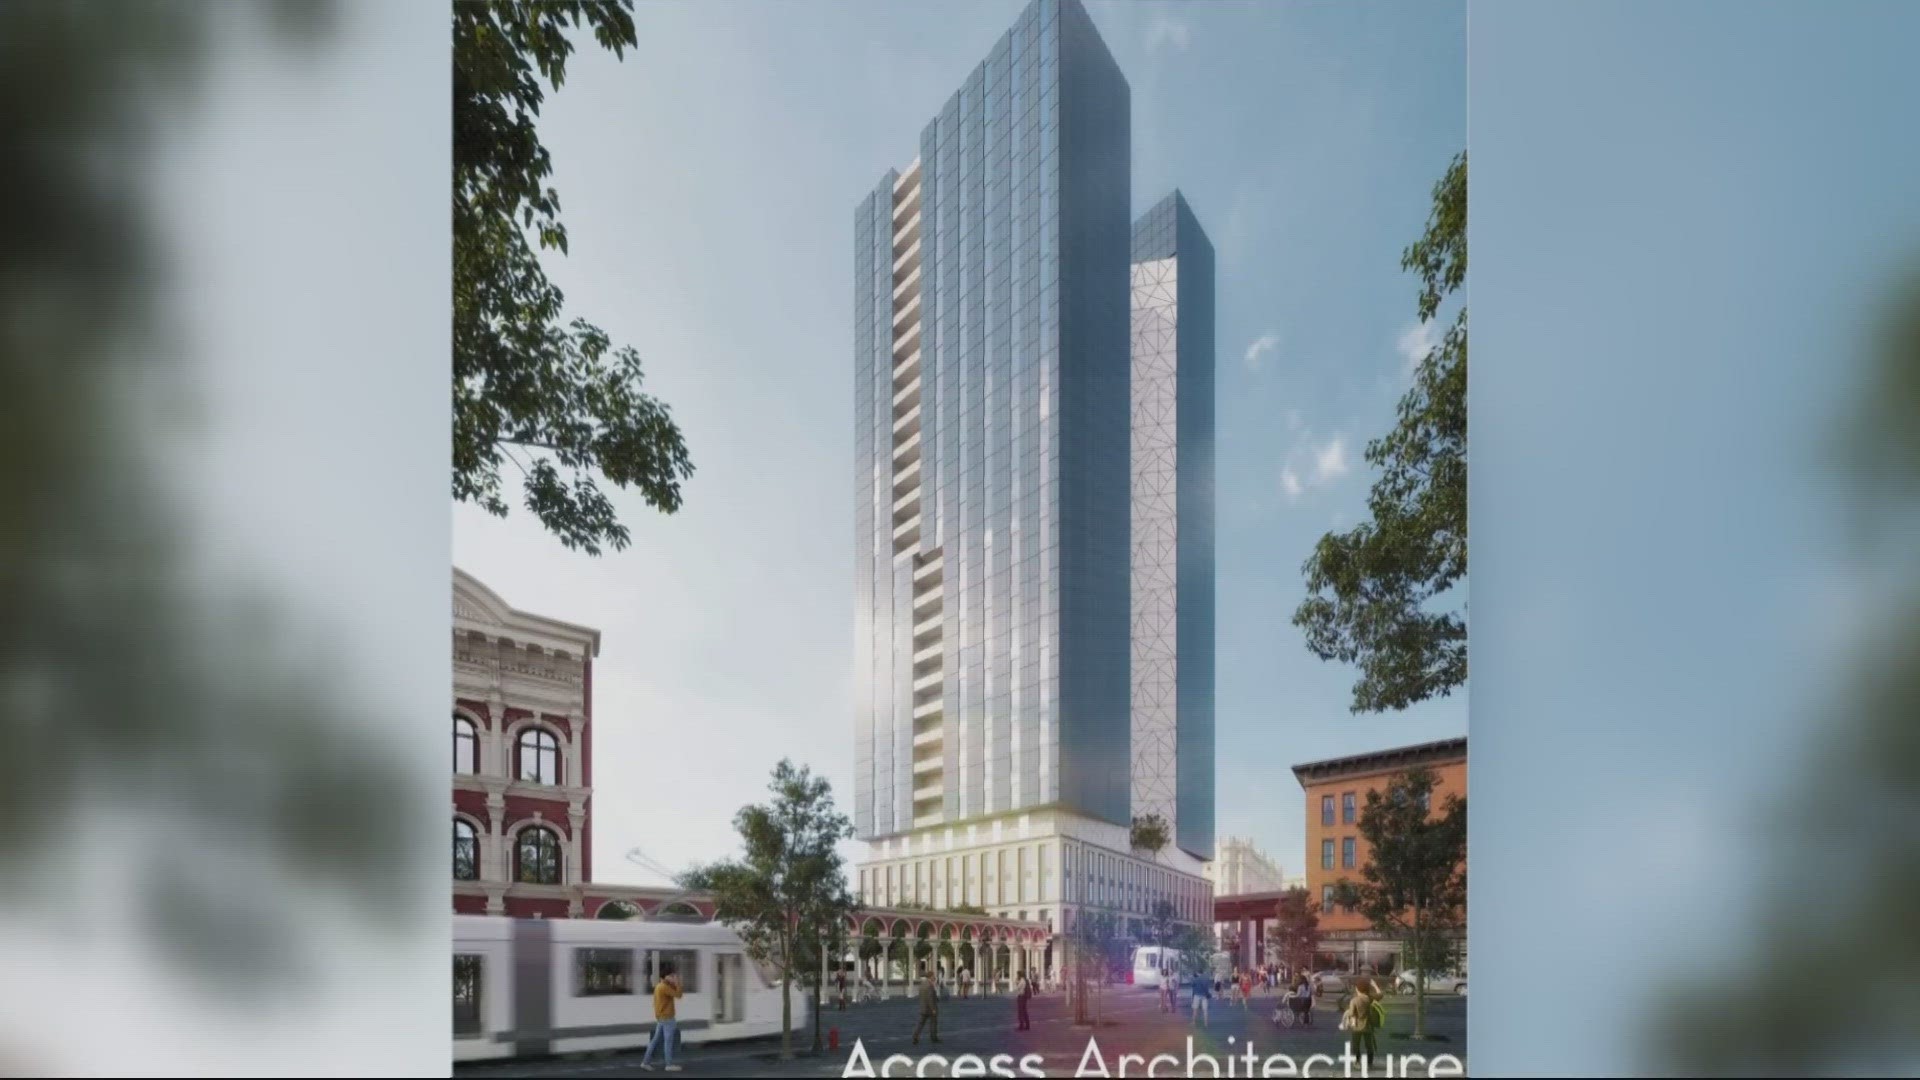 The proposed 728-unit affordable housing tower is not permitted at 108 West Burnside because of the city's seven-story height limit.